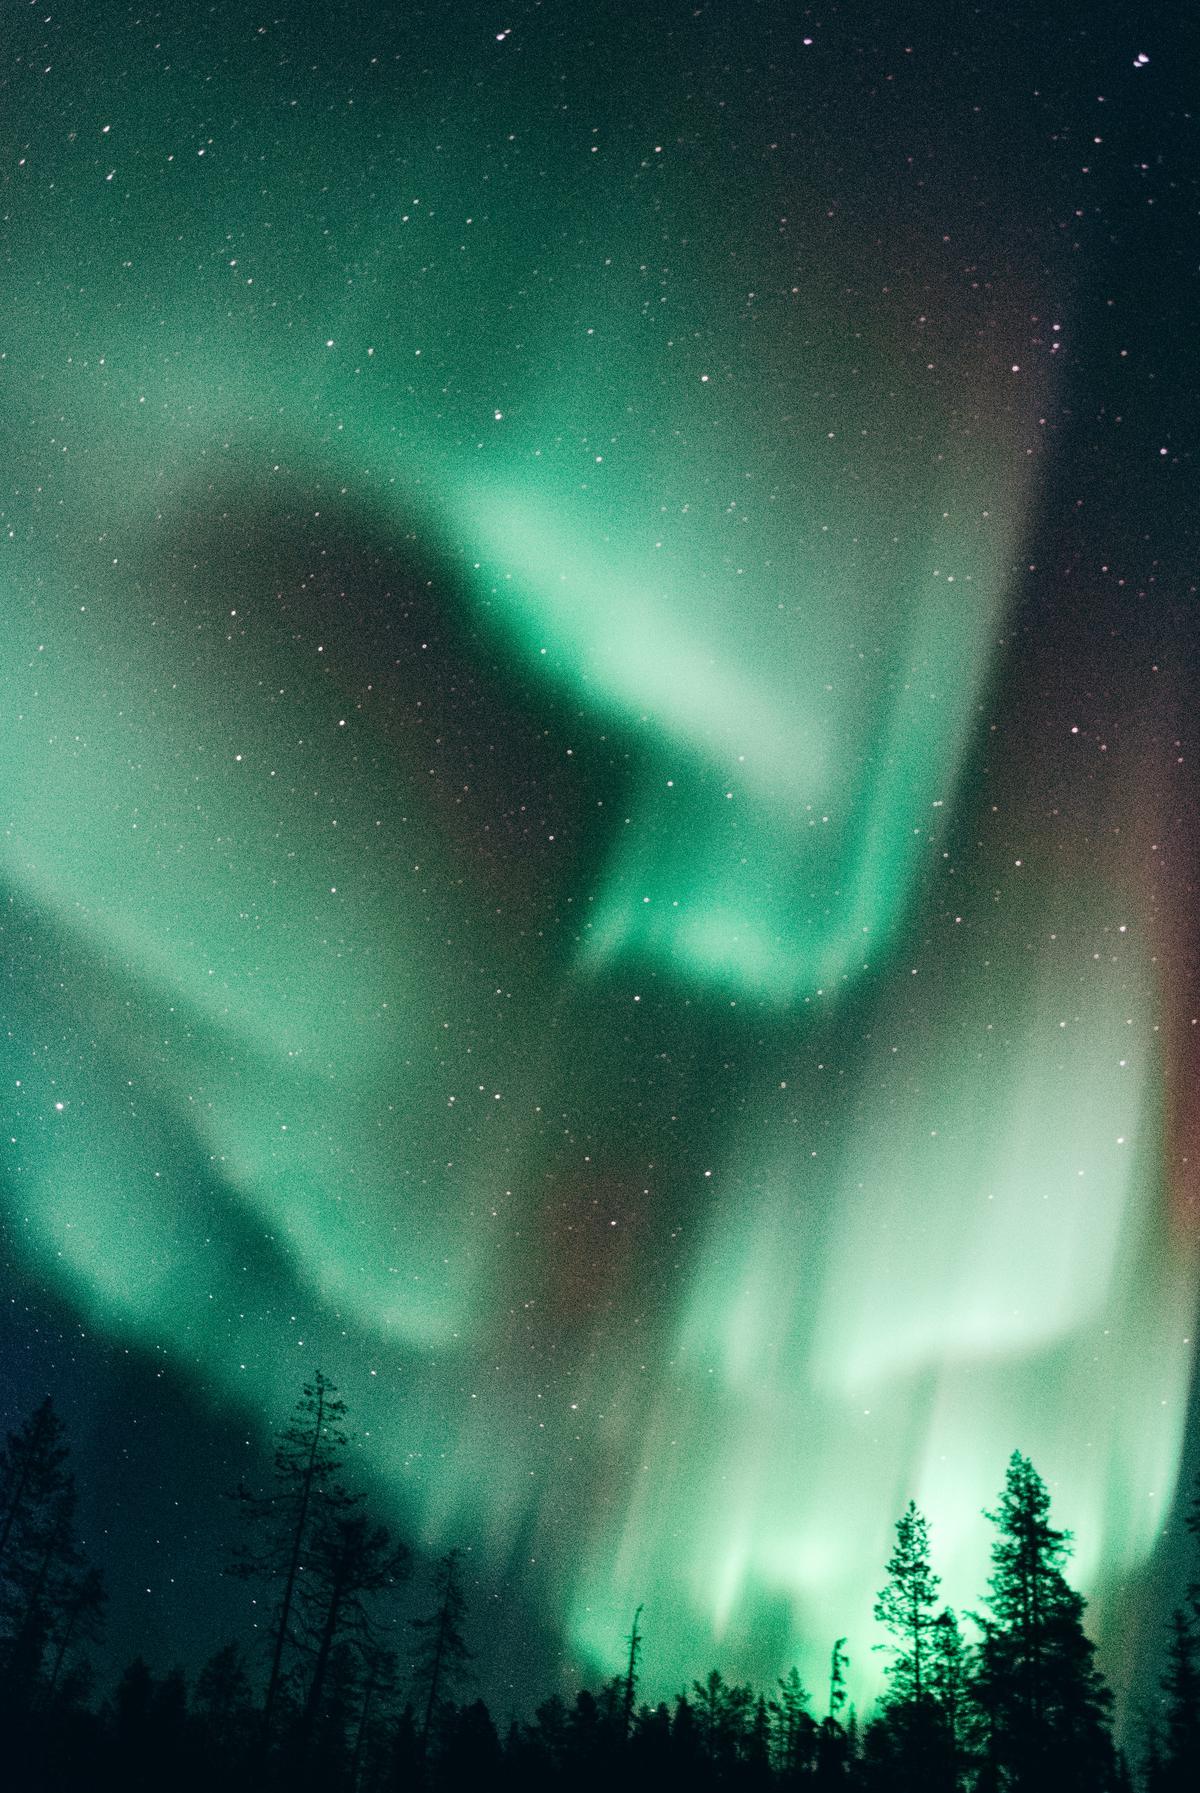 The northern lights is a natural phenomenon that occurs in the skies near the Arctic Circle, featuring colorful, dancing lights that illuminate the darkness.